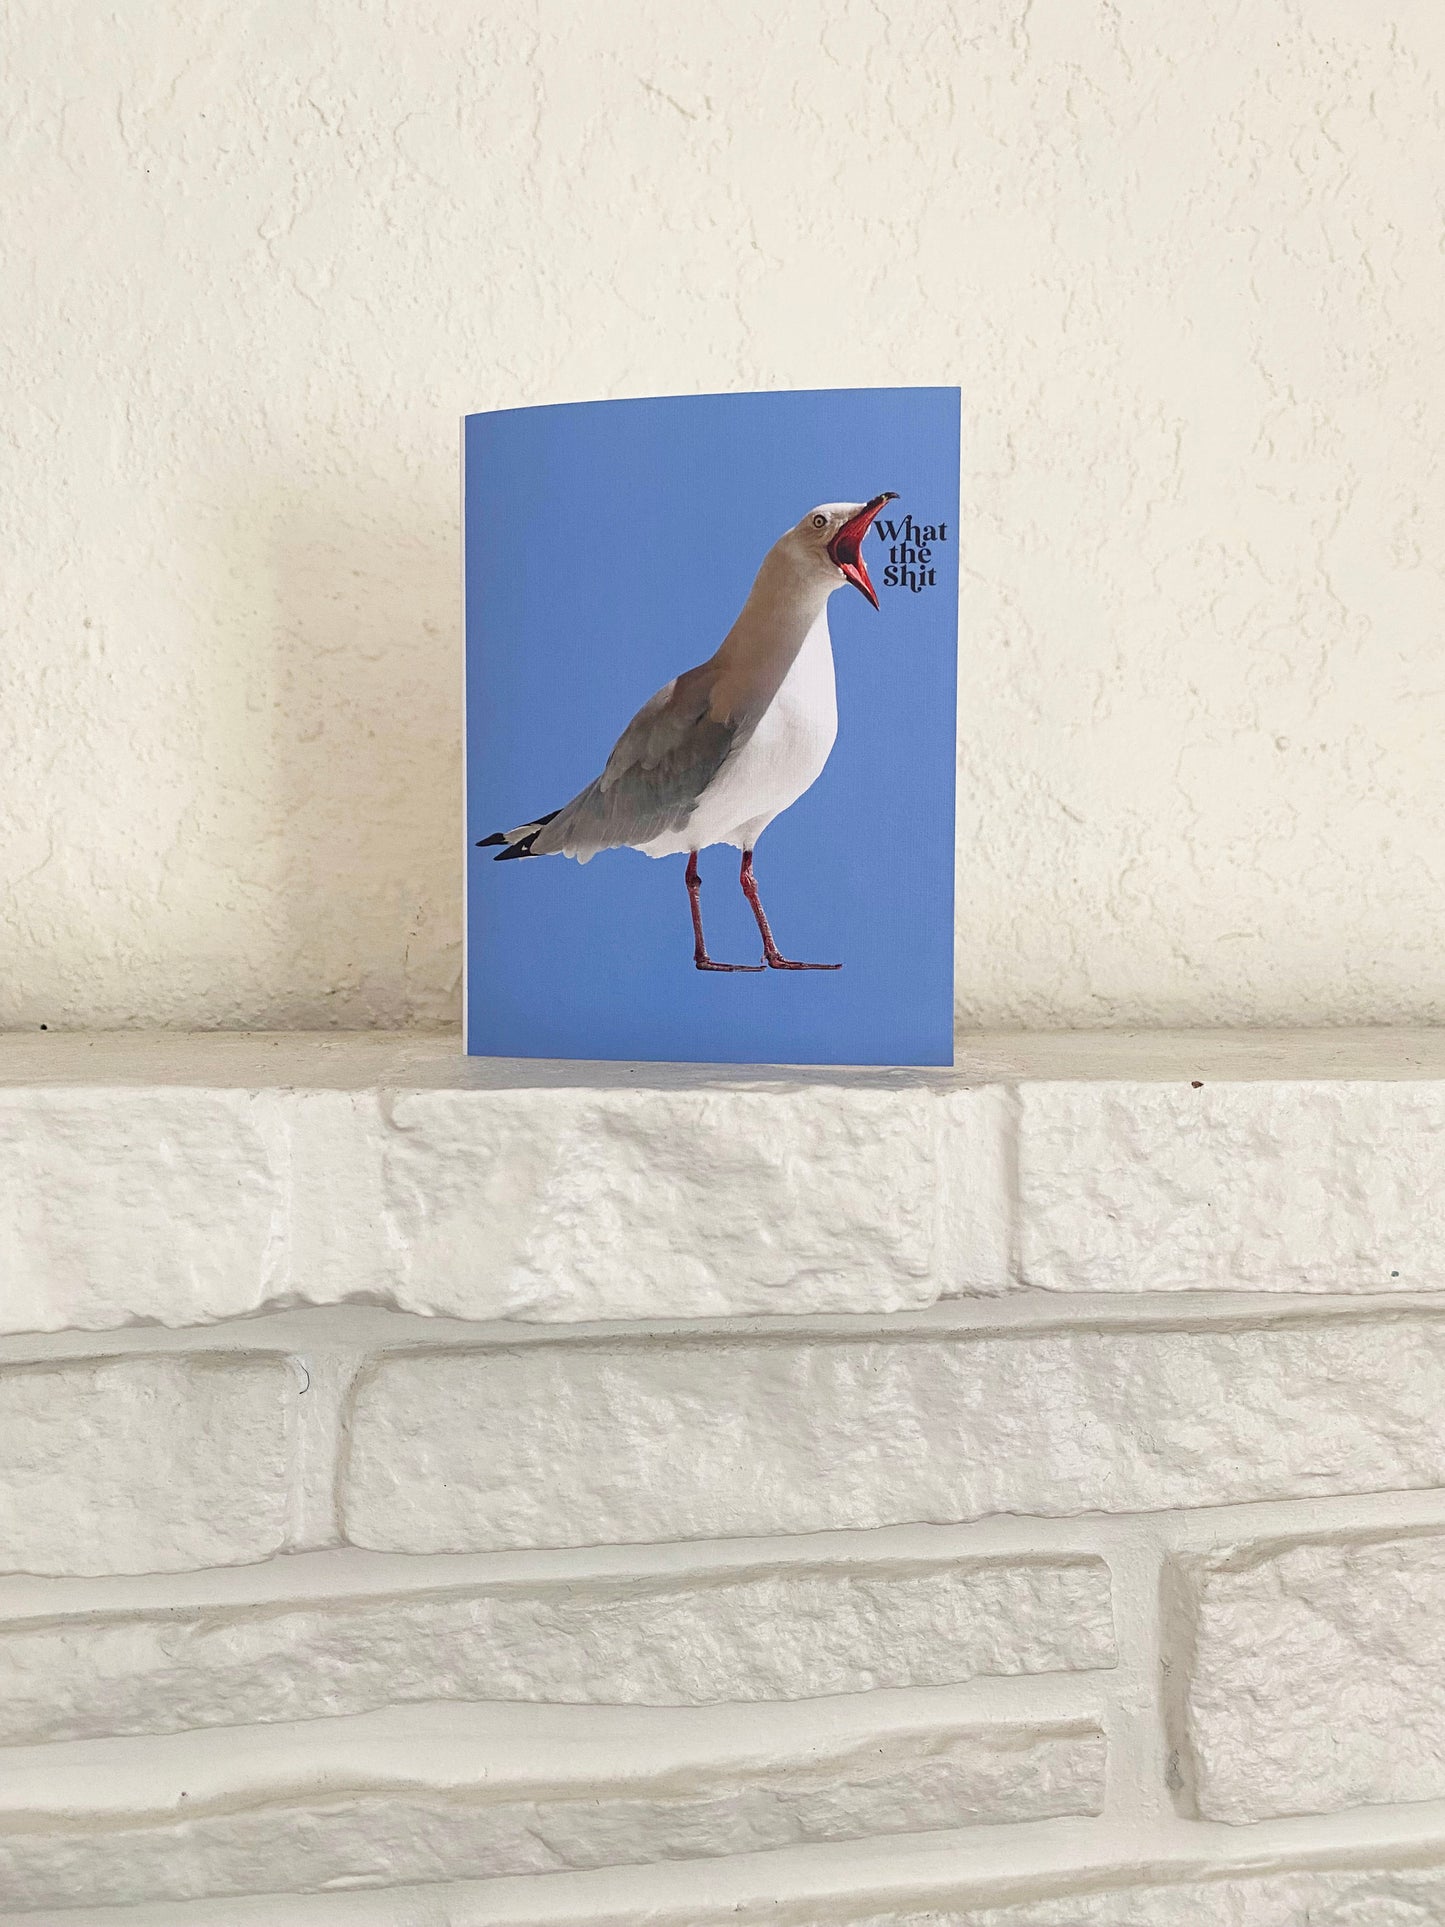 cute notecard with fun greeting what the shit funny any occasion bird seagull yelling cute retro style cards coin laundry montana funny cards